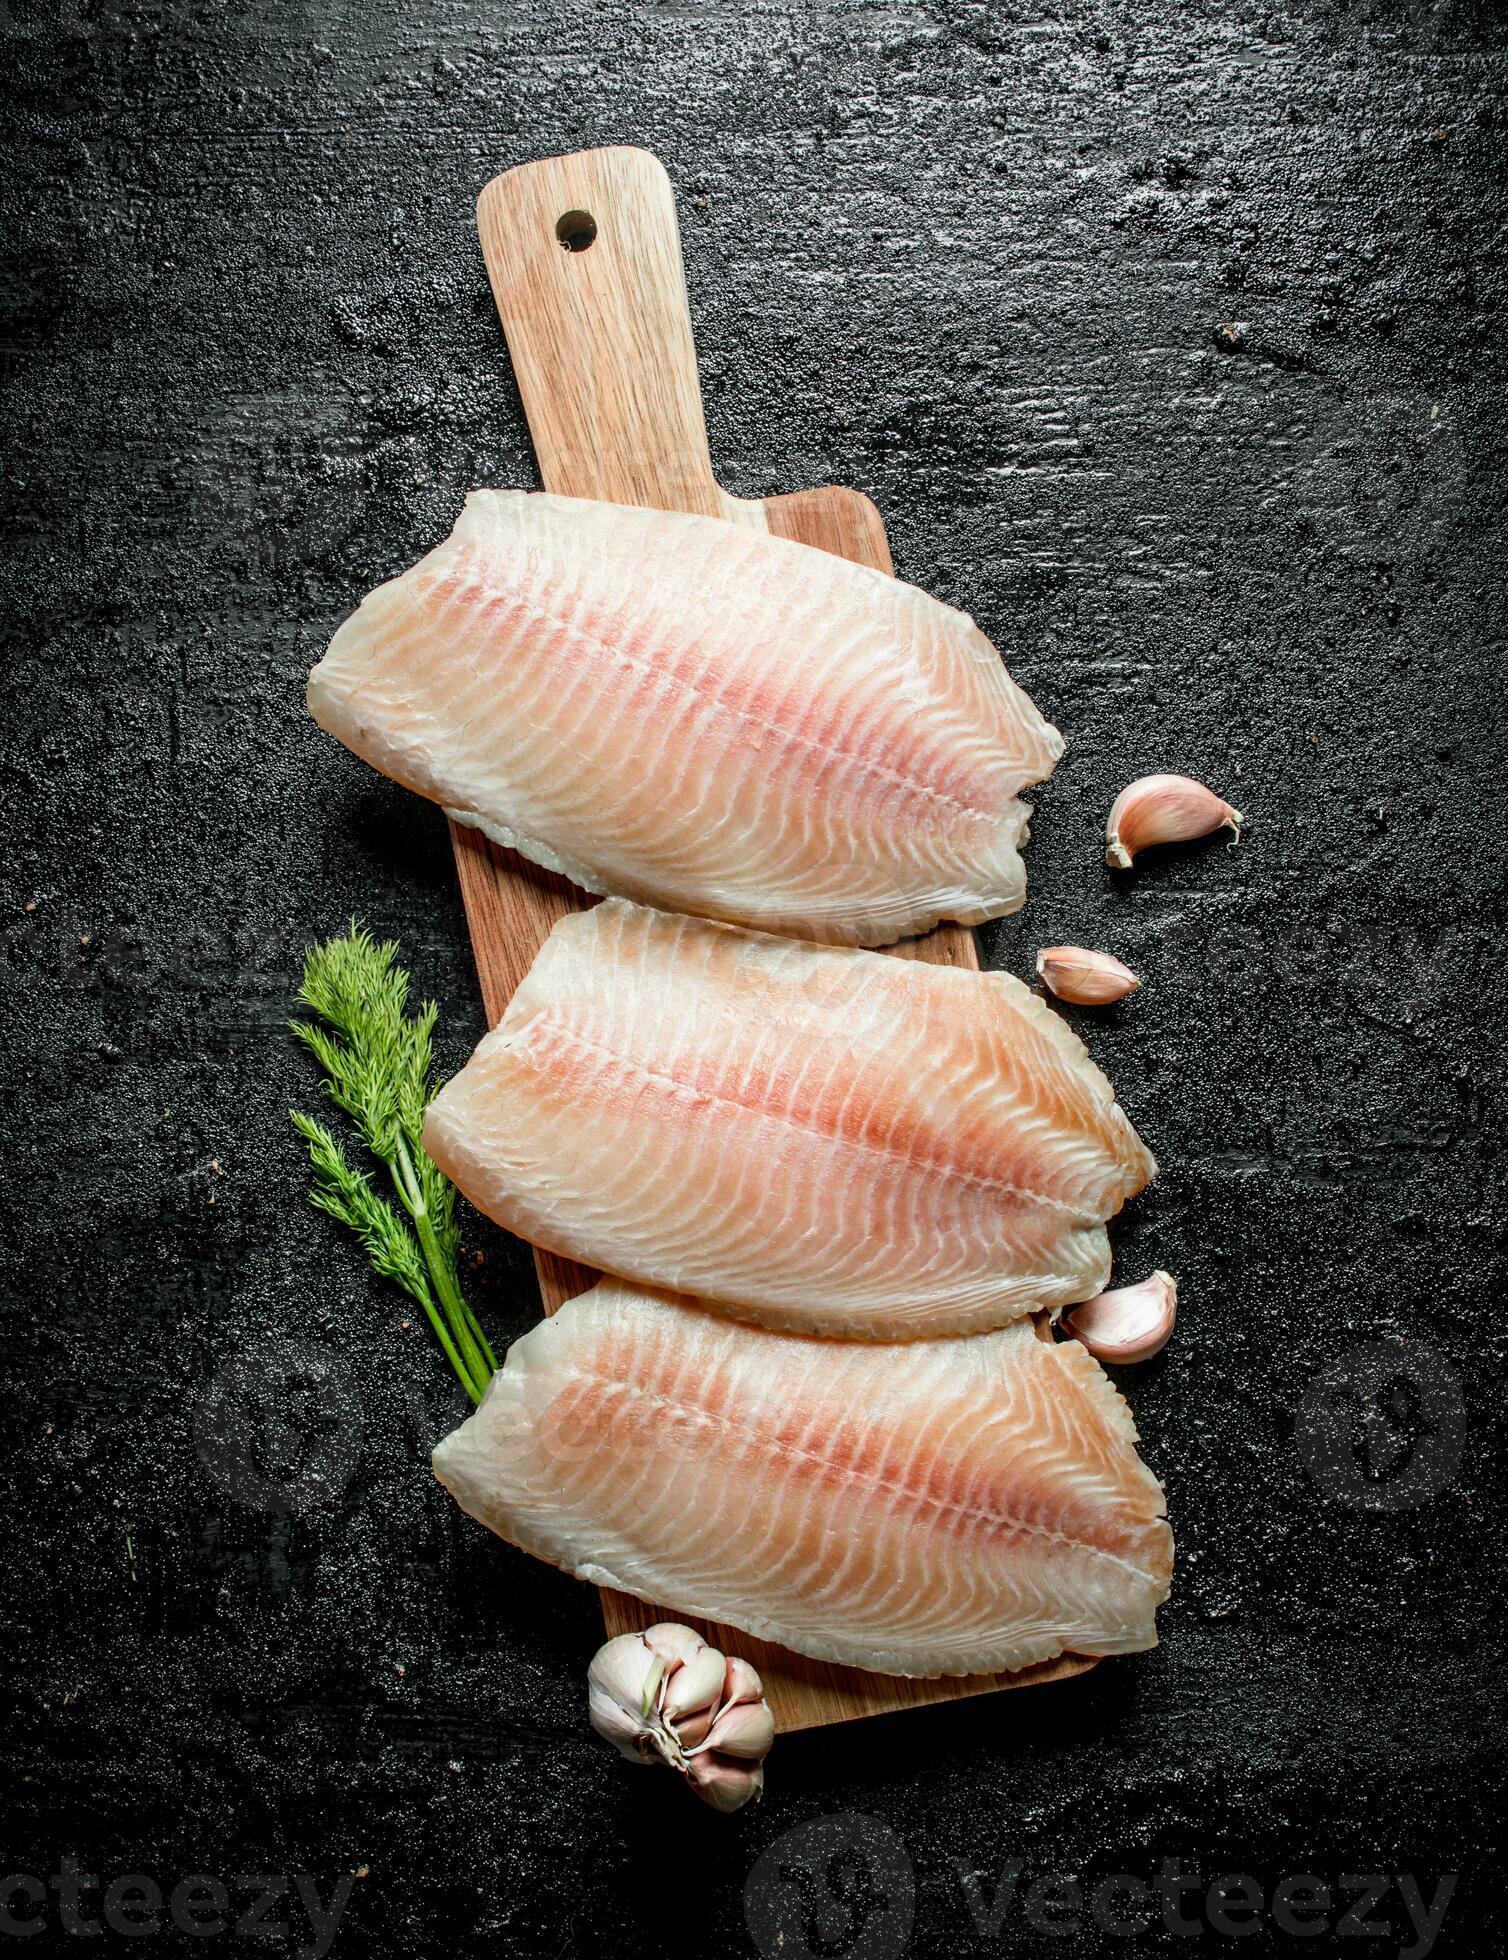 https://static.vecteezy.com/system/resources/previews/032/005/317/large_2x/fish-fillet-on-a-wooden-stand-with-dill-and-garlic-cloves-photo.jpg